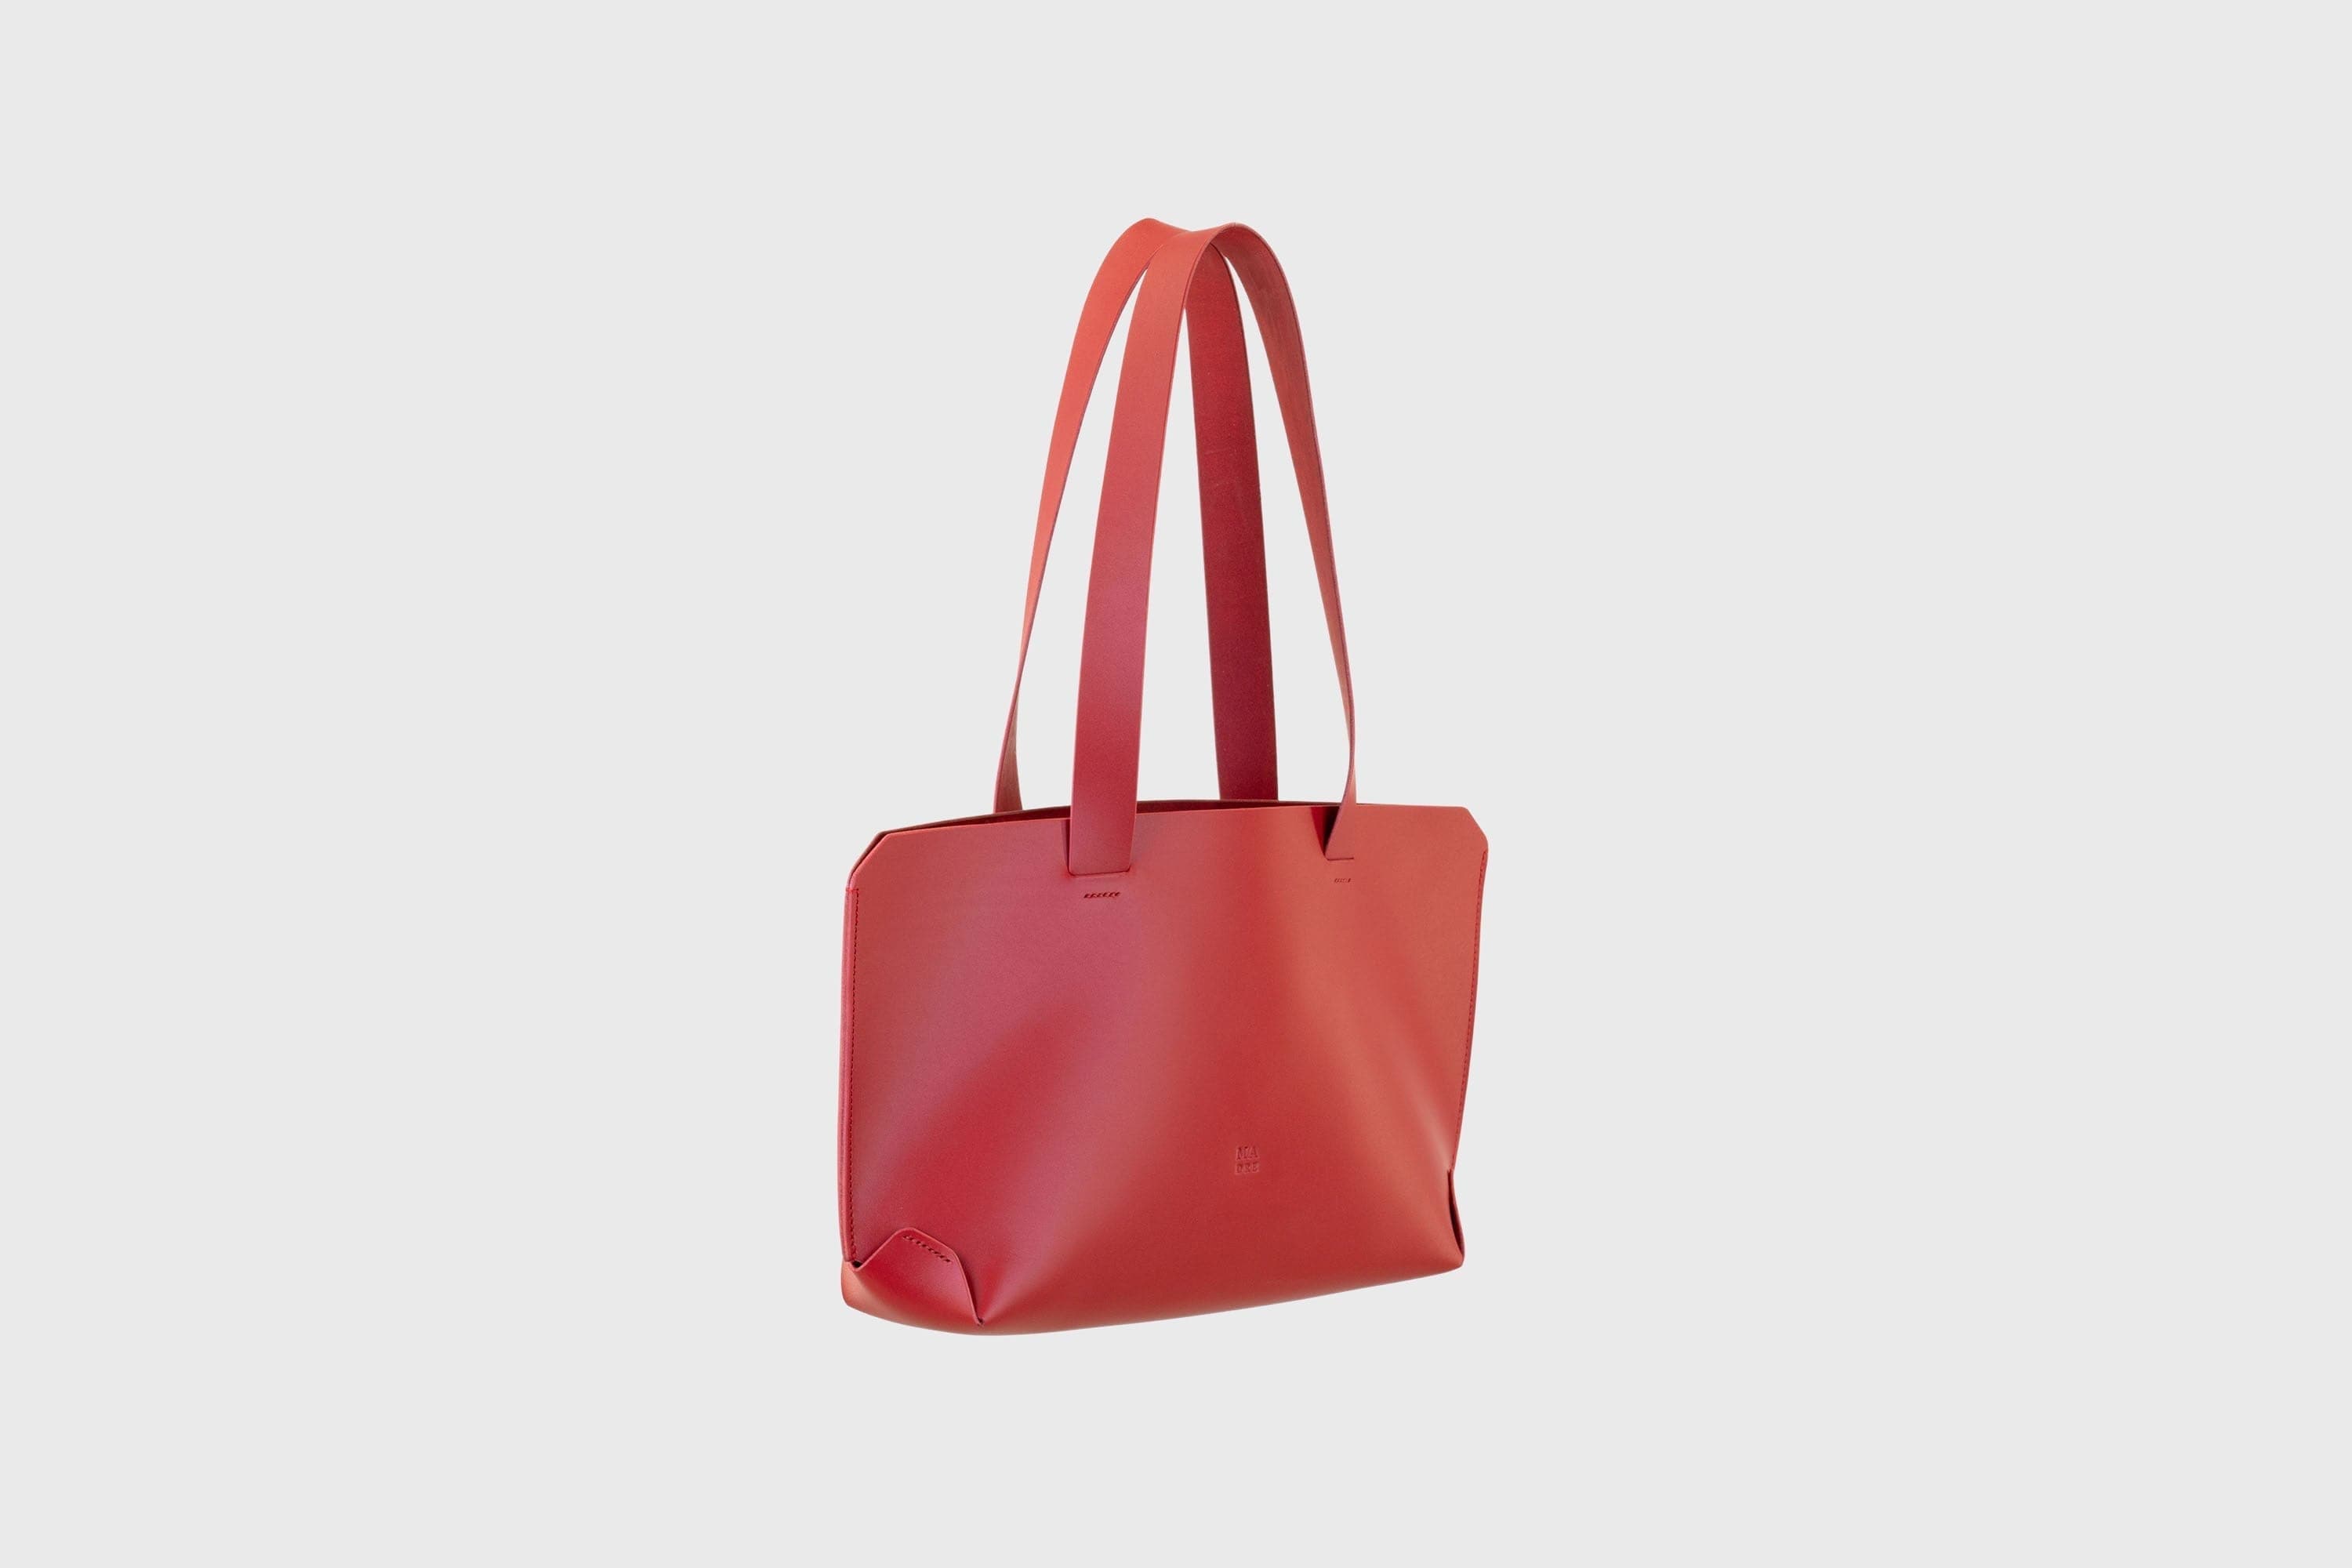 Tote Bag Red Color Vegetable Tanned Leather Vachetta High Quality Made By Hand And Design By Manuel Dreesmann Atelier Madre Barcelona Spain